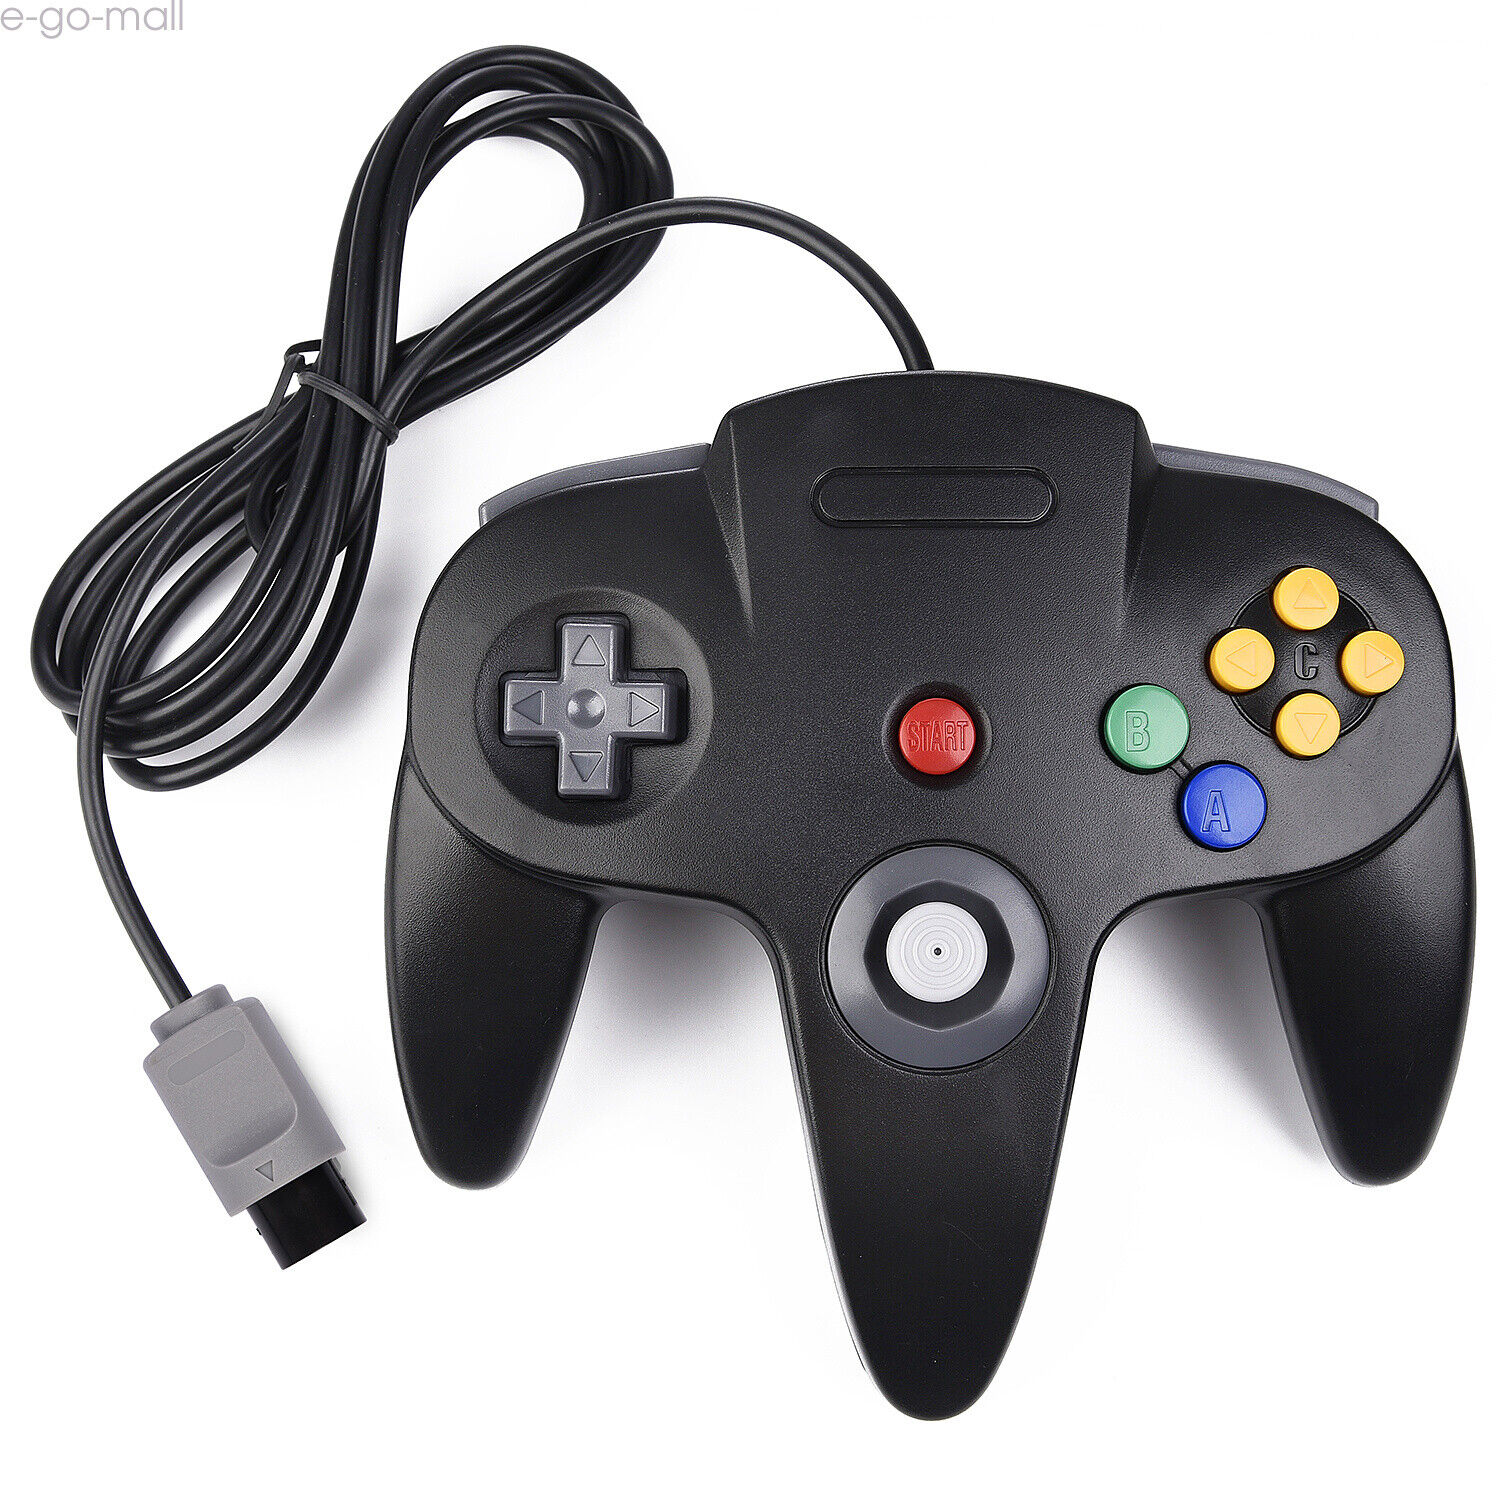 Wired Classic N64 Controller Gamepad Remote Joystick for N64 CONSOLE BLACK